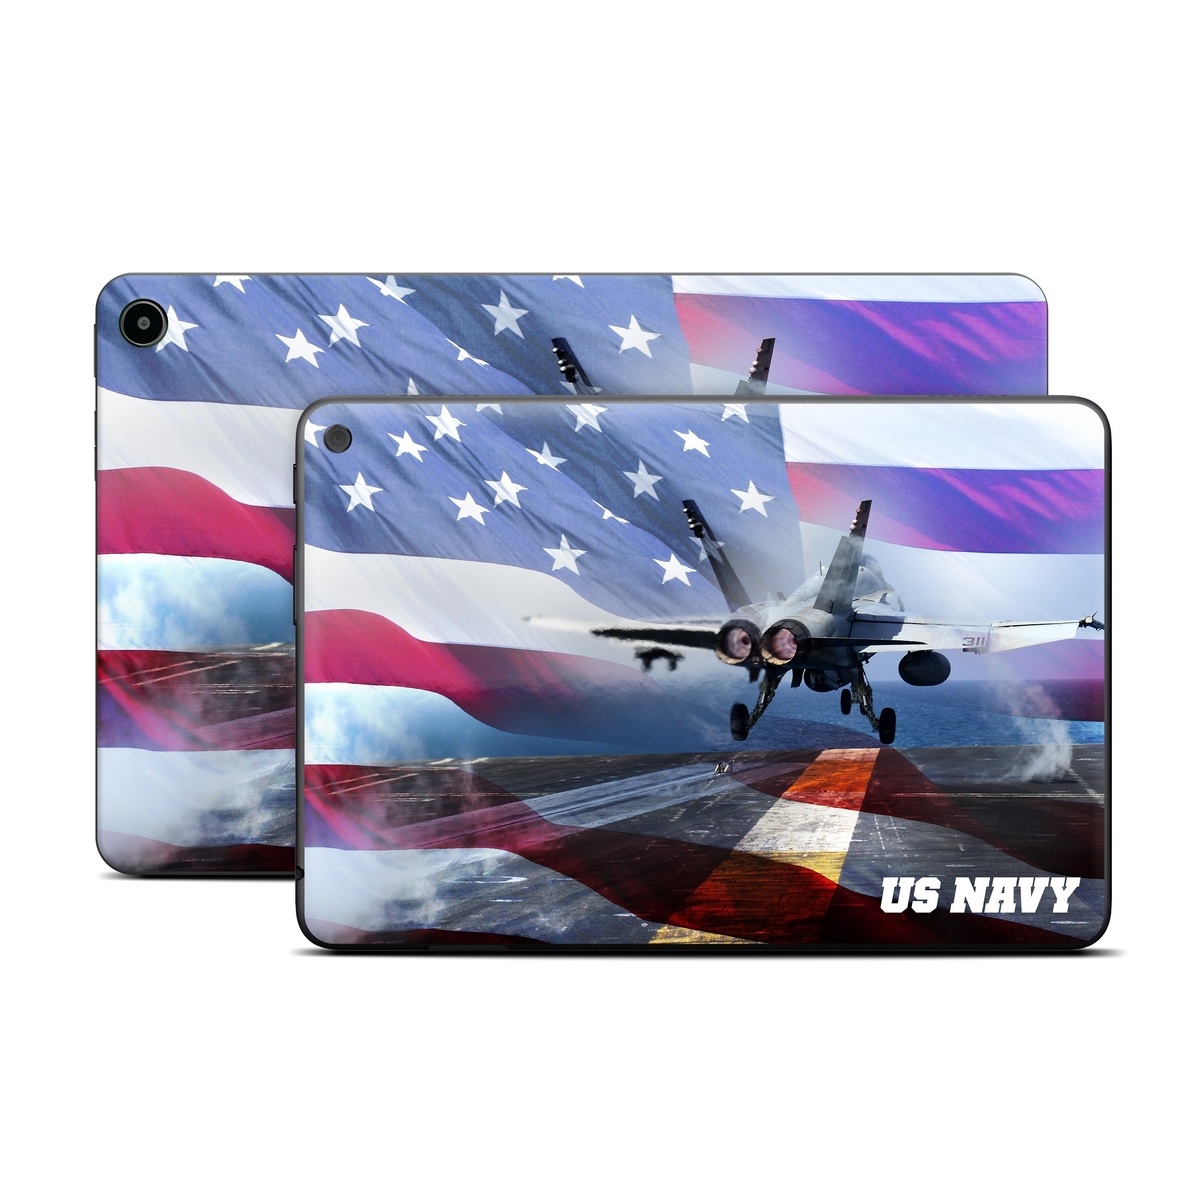 Amazon Fire Tablet Series Skin Skin design of Airplane, Aircraft, Aviation, Vehicle, Airline, Aerospace engineering, Air travel, Air force, Sky, Flight, with gray, black, blue, purple colors